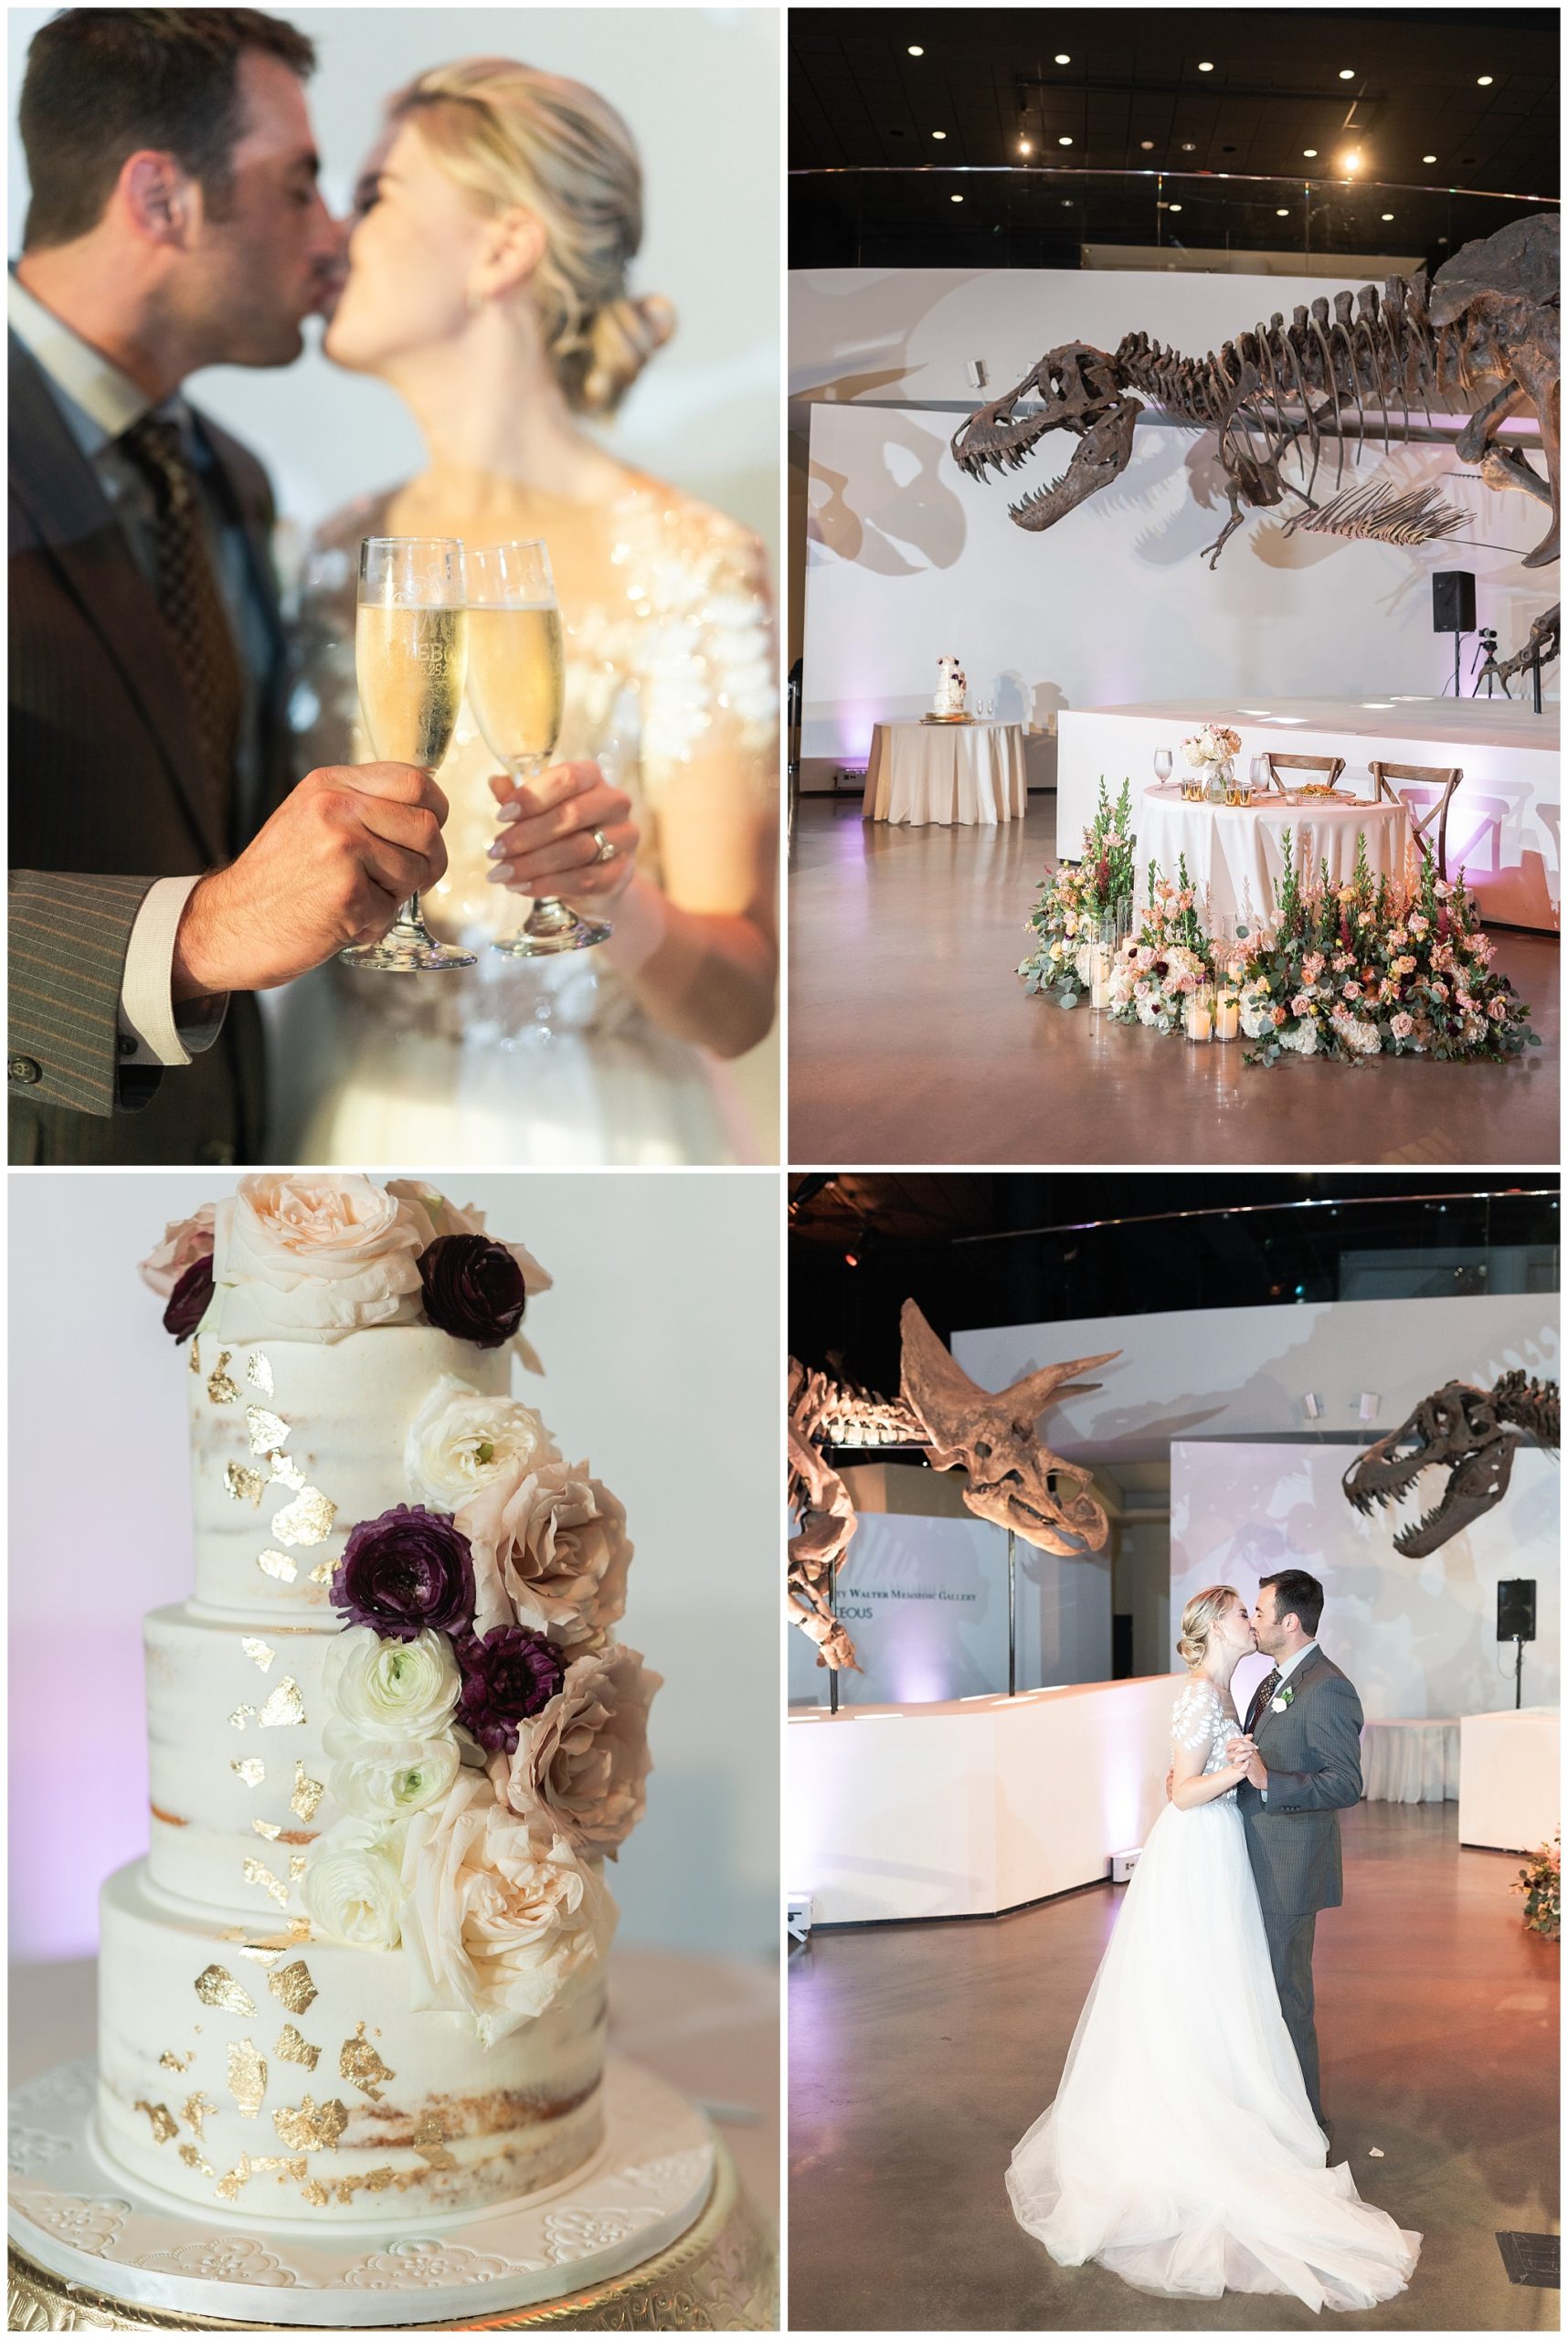 wedding cake at houston museum of natural science by Houston's best wedding photographers Swish and Click Photography